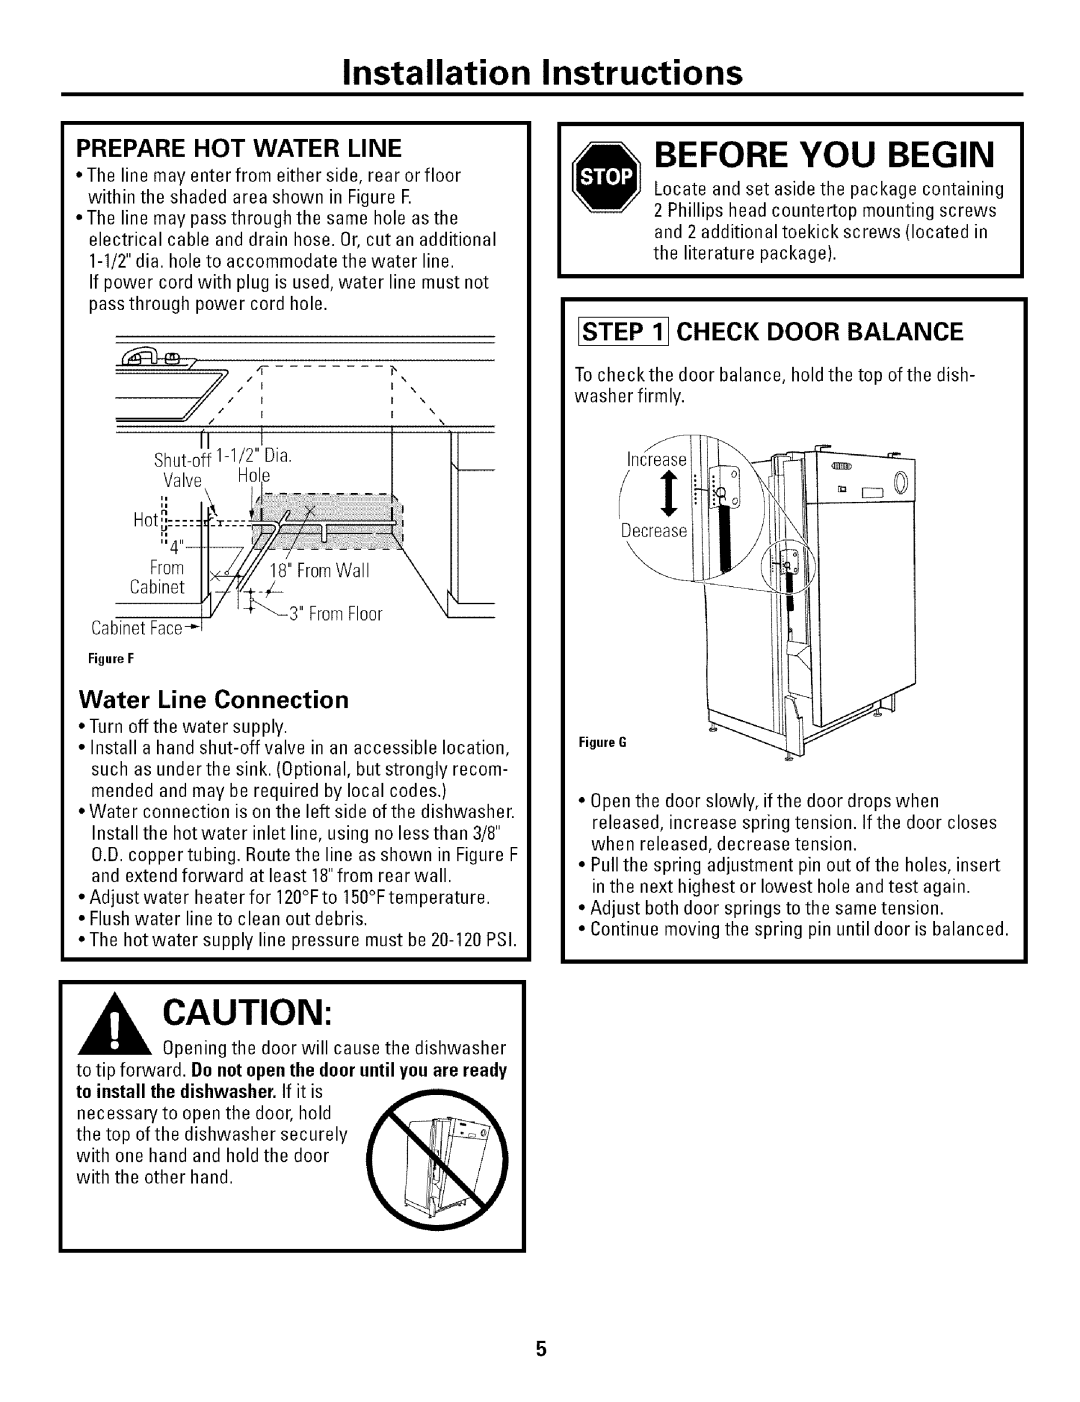 GE L0523252 Installation, Instructions, Prepare Hot Water Line, ISTEP 11CHECK DOOR BALANCE, Before You Begin 